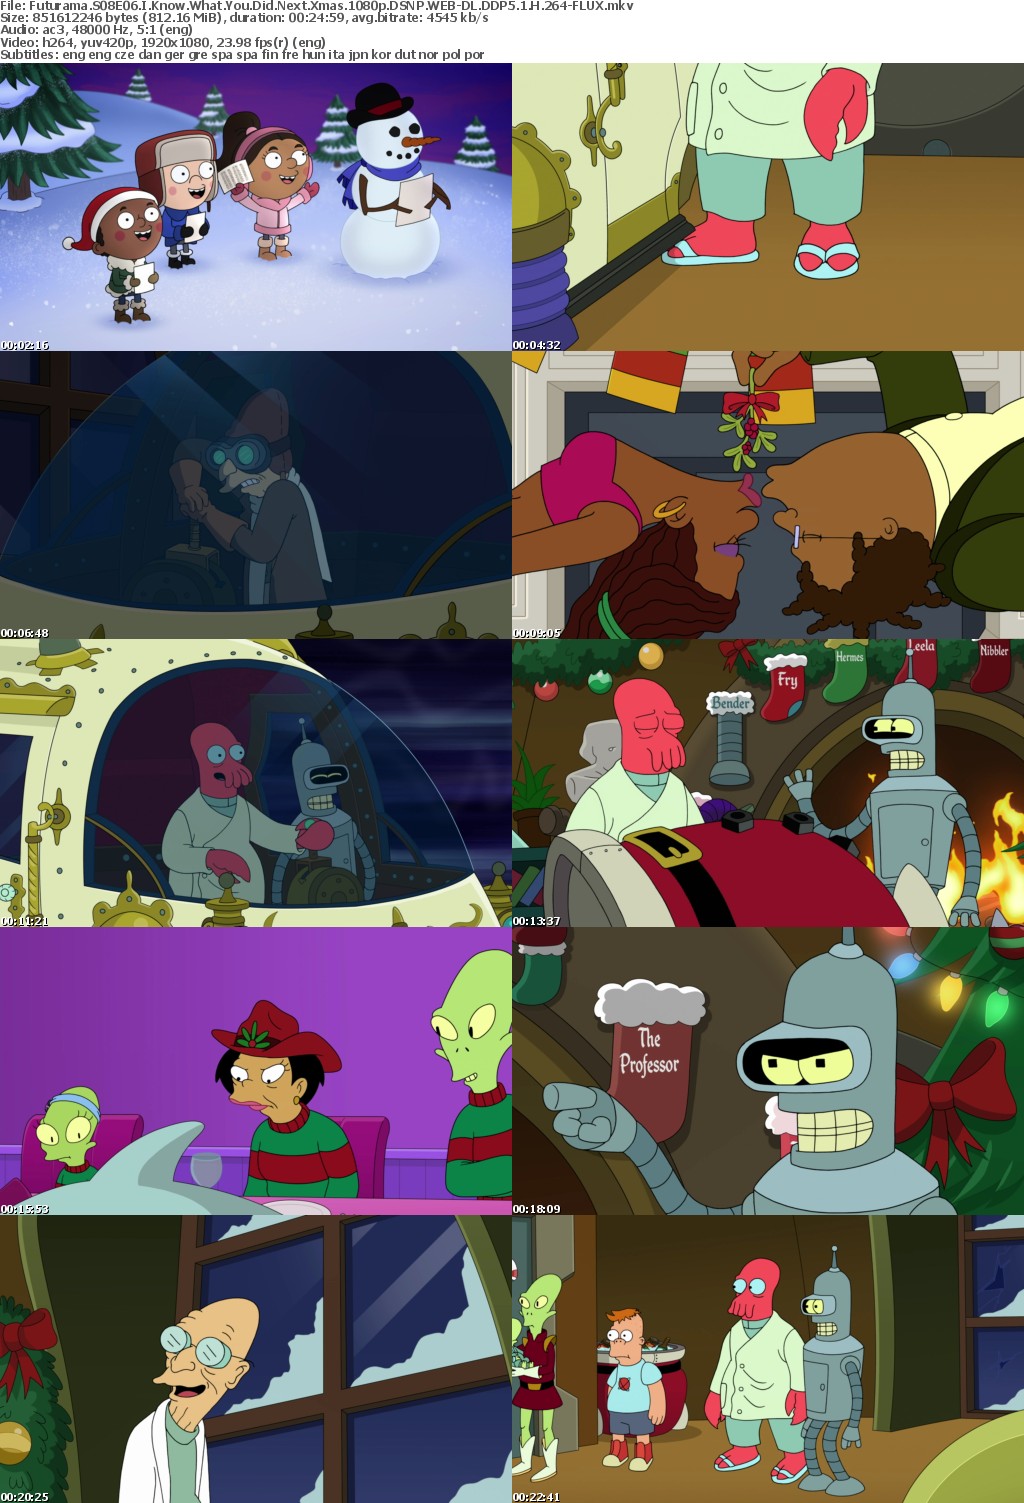 Futurama S08E06 I Know What You Did Next Xmas 1080p DSNP WEB-DL DDP5 1 H 264-FLUX